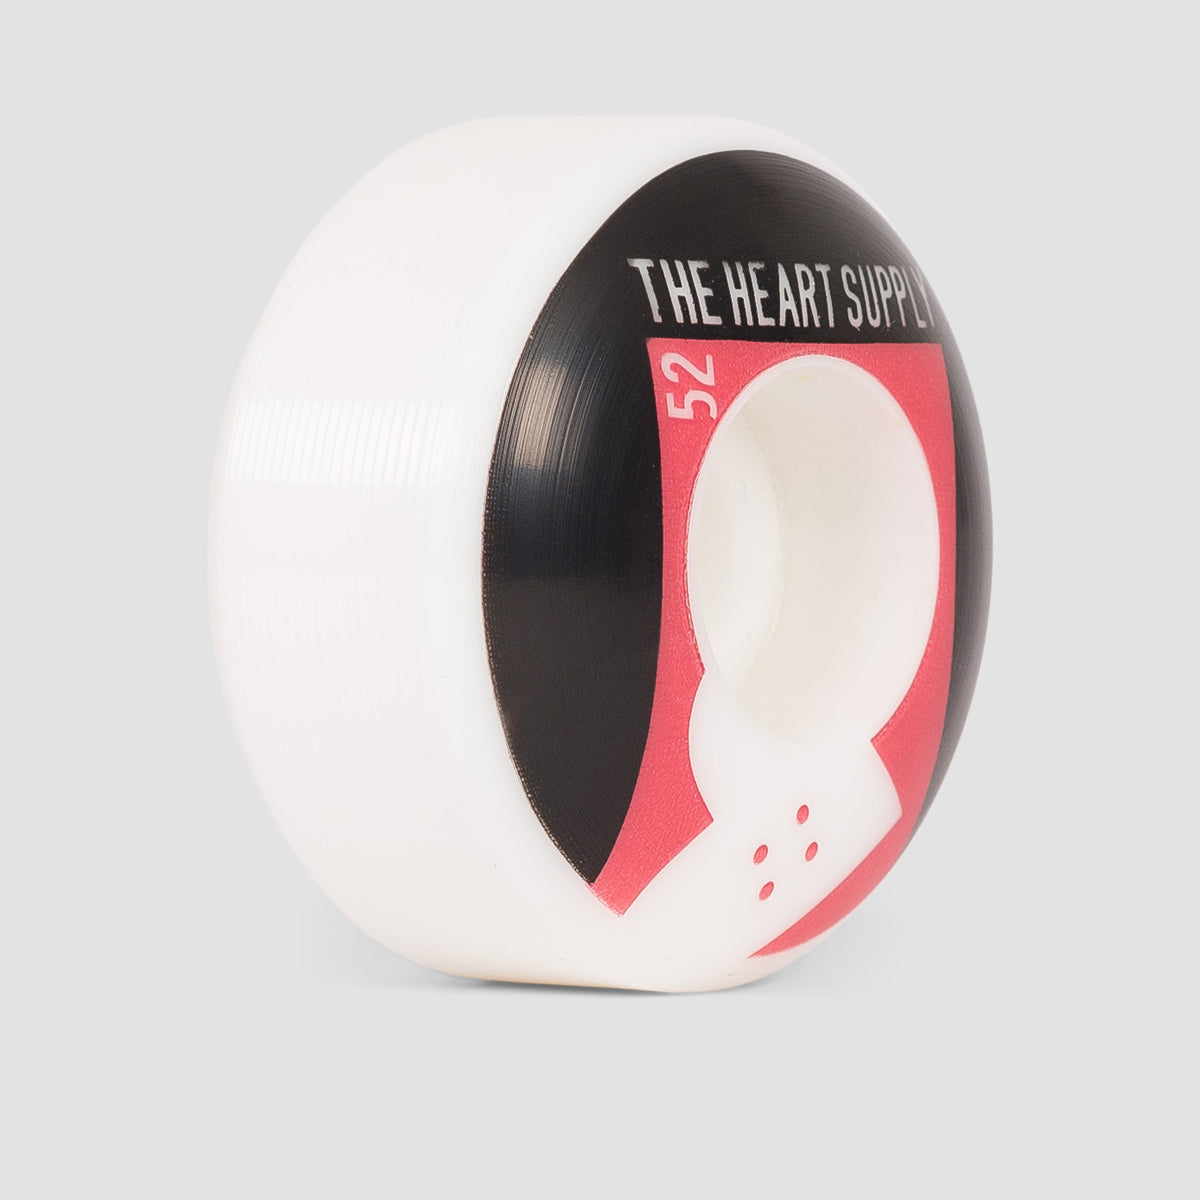 The Heart Supply Even Skateboard Wheels Red 52mm